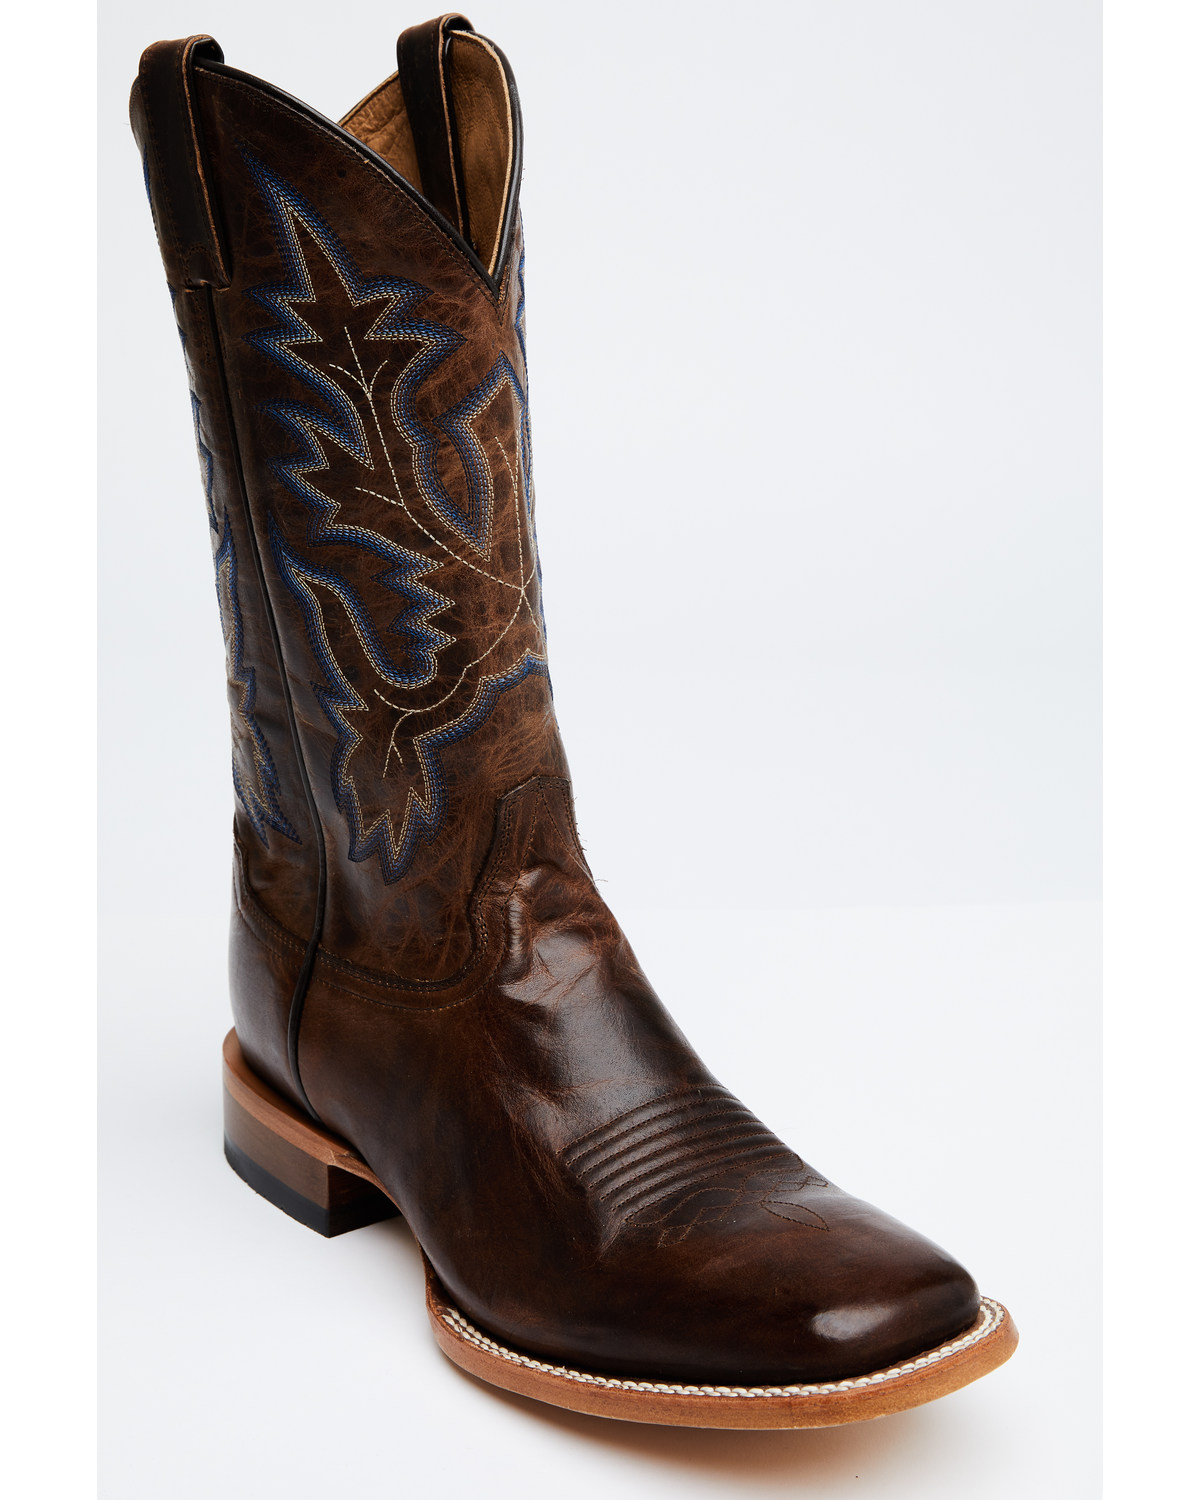 Cody James Men's Duval Western Boots - Broad Square Toe